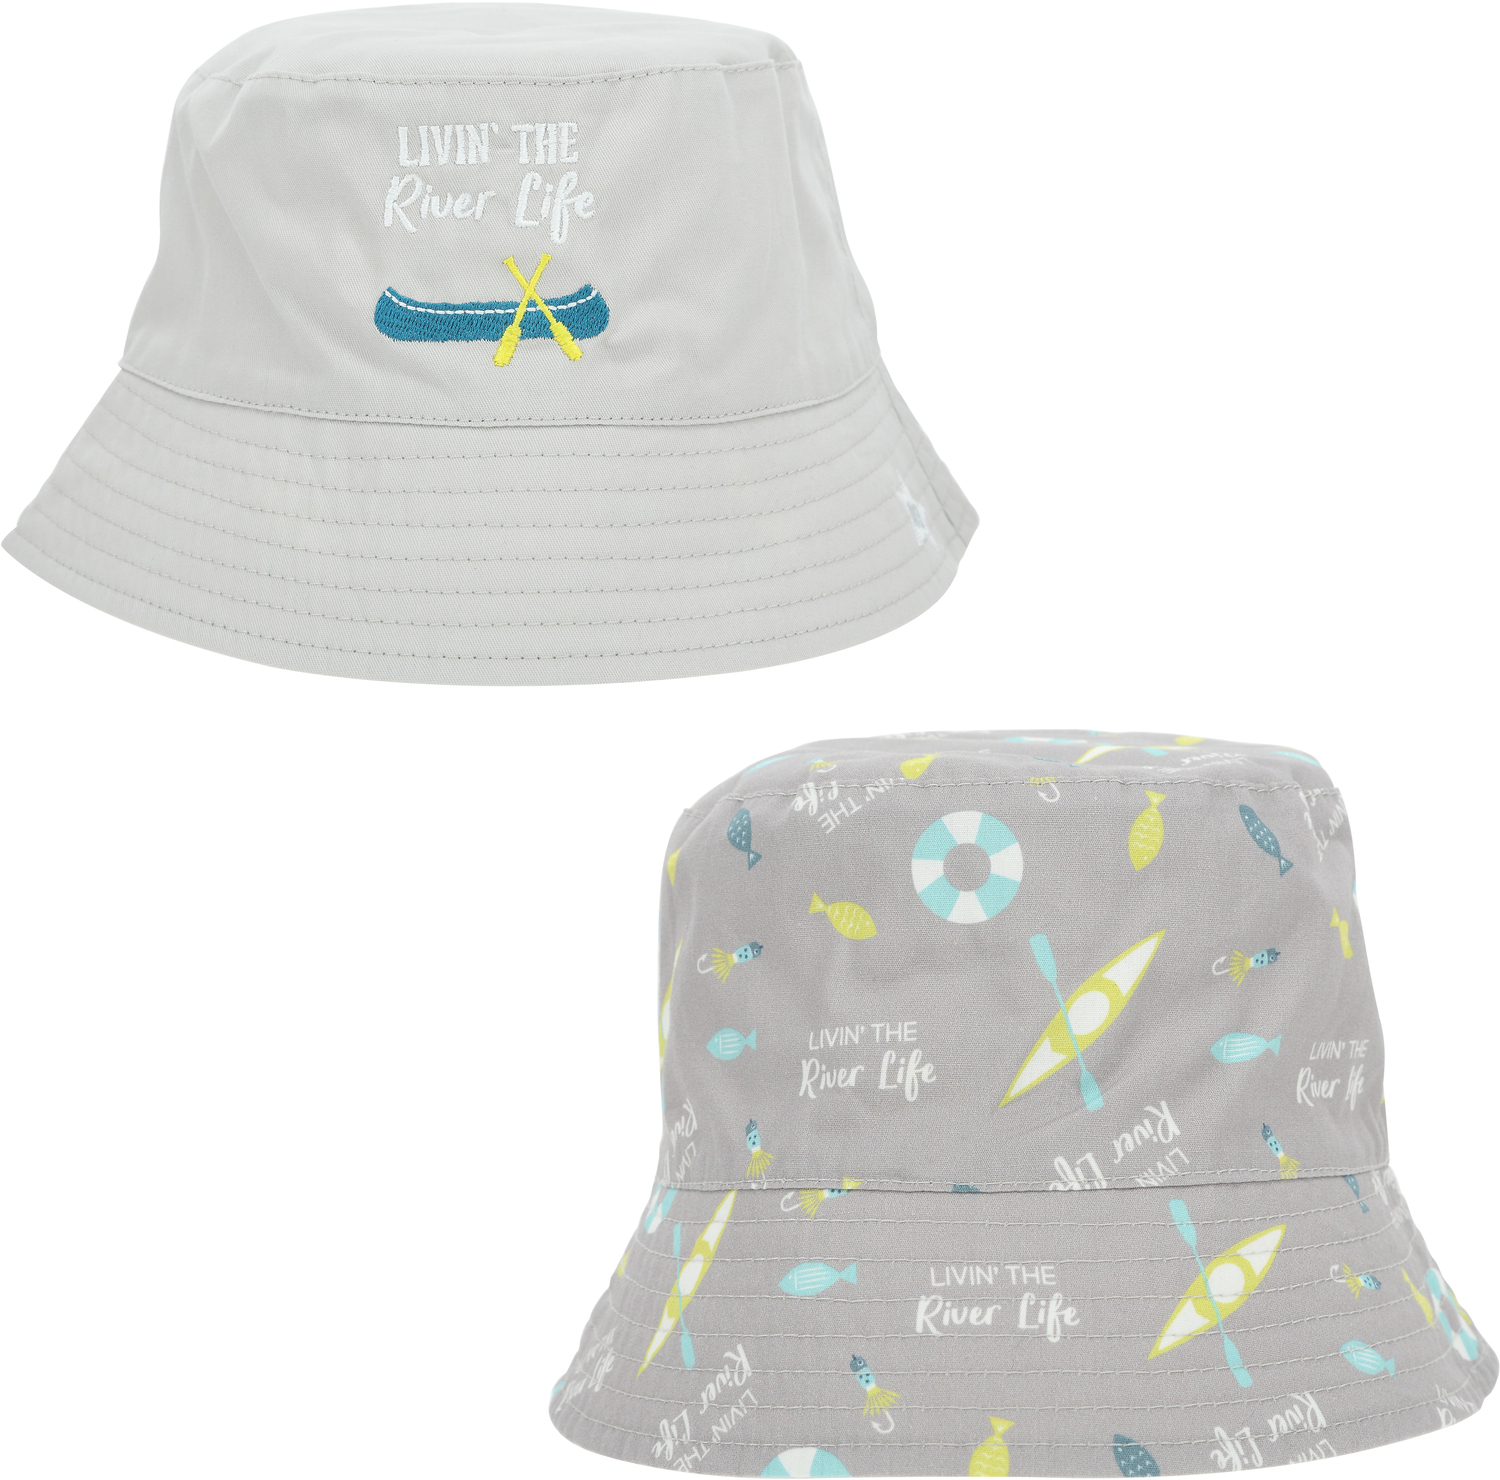 River Life by We Baby - River Life - Reversible Bucket Hat
6-12 Months